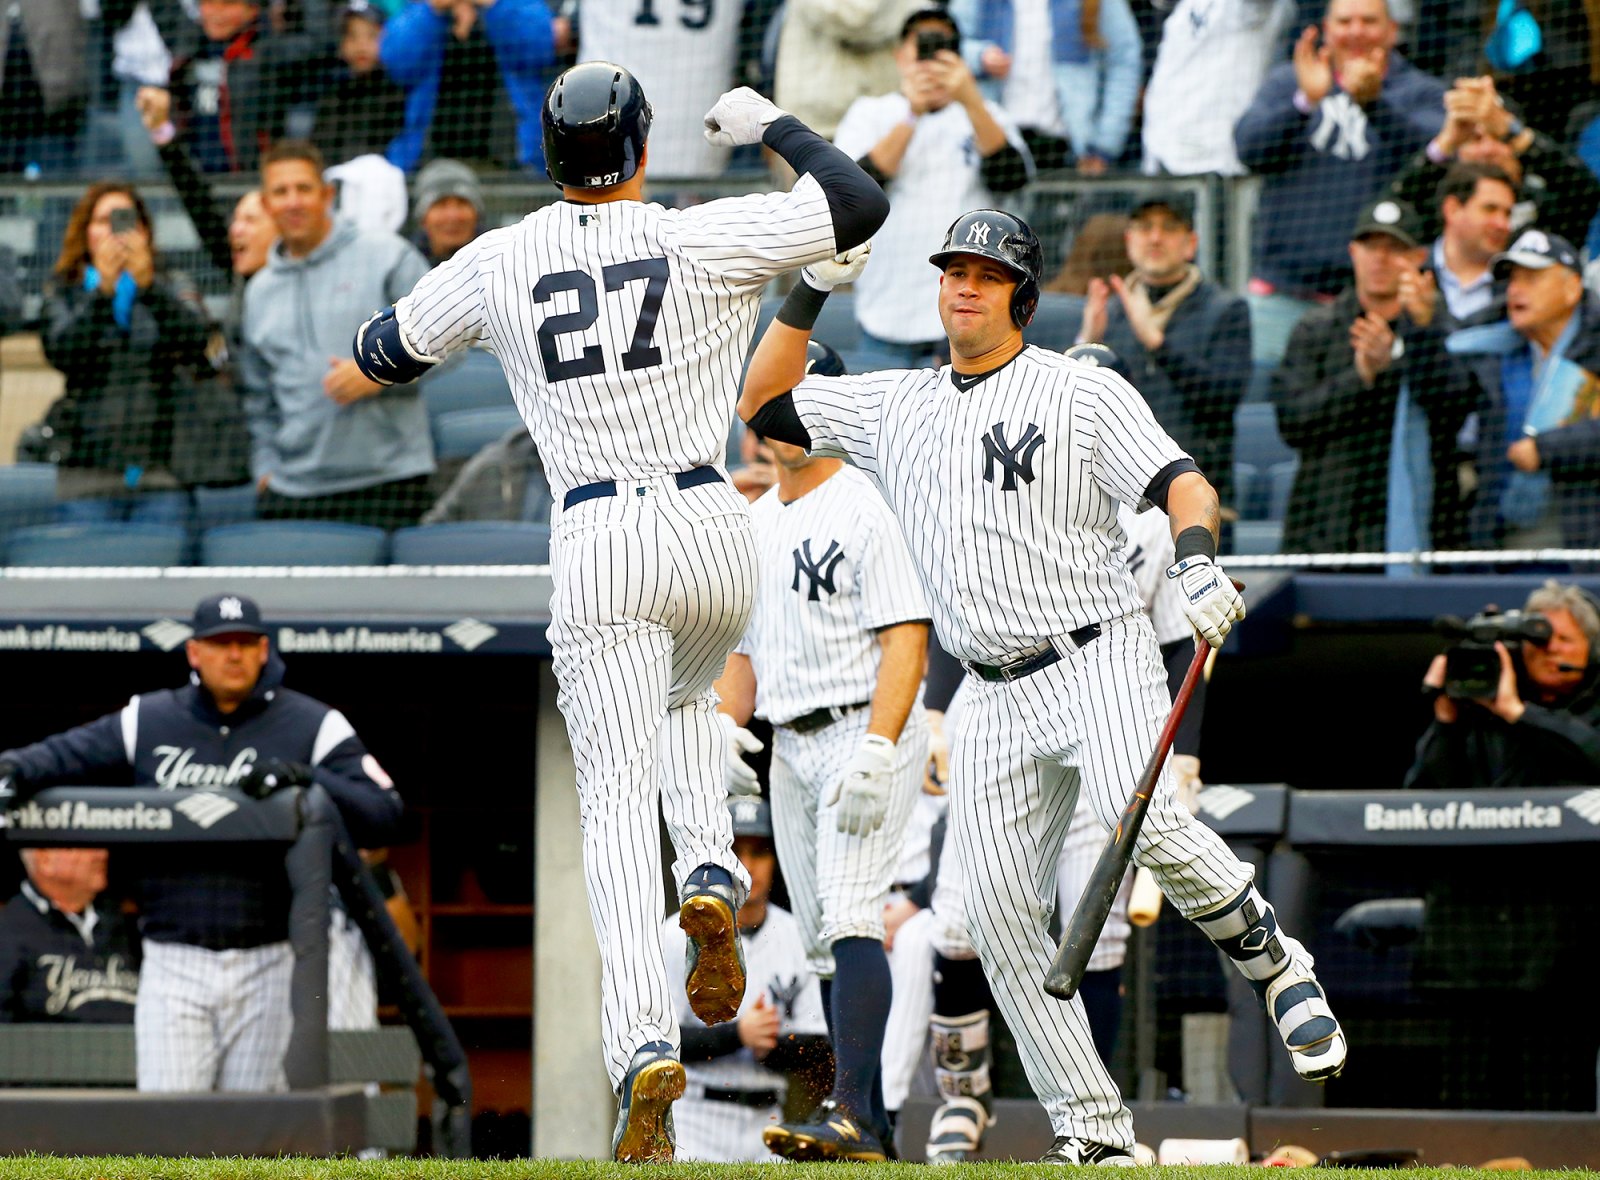 Giancarlo Stanton #27 of the New York Yankees celebrates his first inning two run home run against the Tampa Bay Rays with teammate Gary Sanchez #24 at Yankee Stadium on April 4, 2018 in the Bronx borough of New York City.